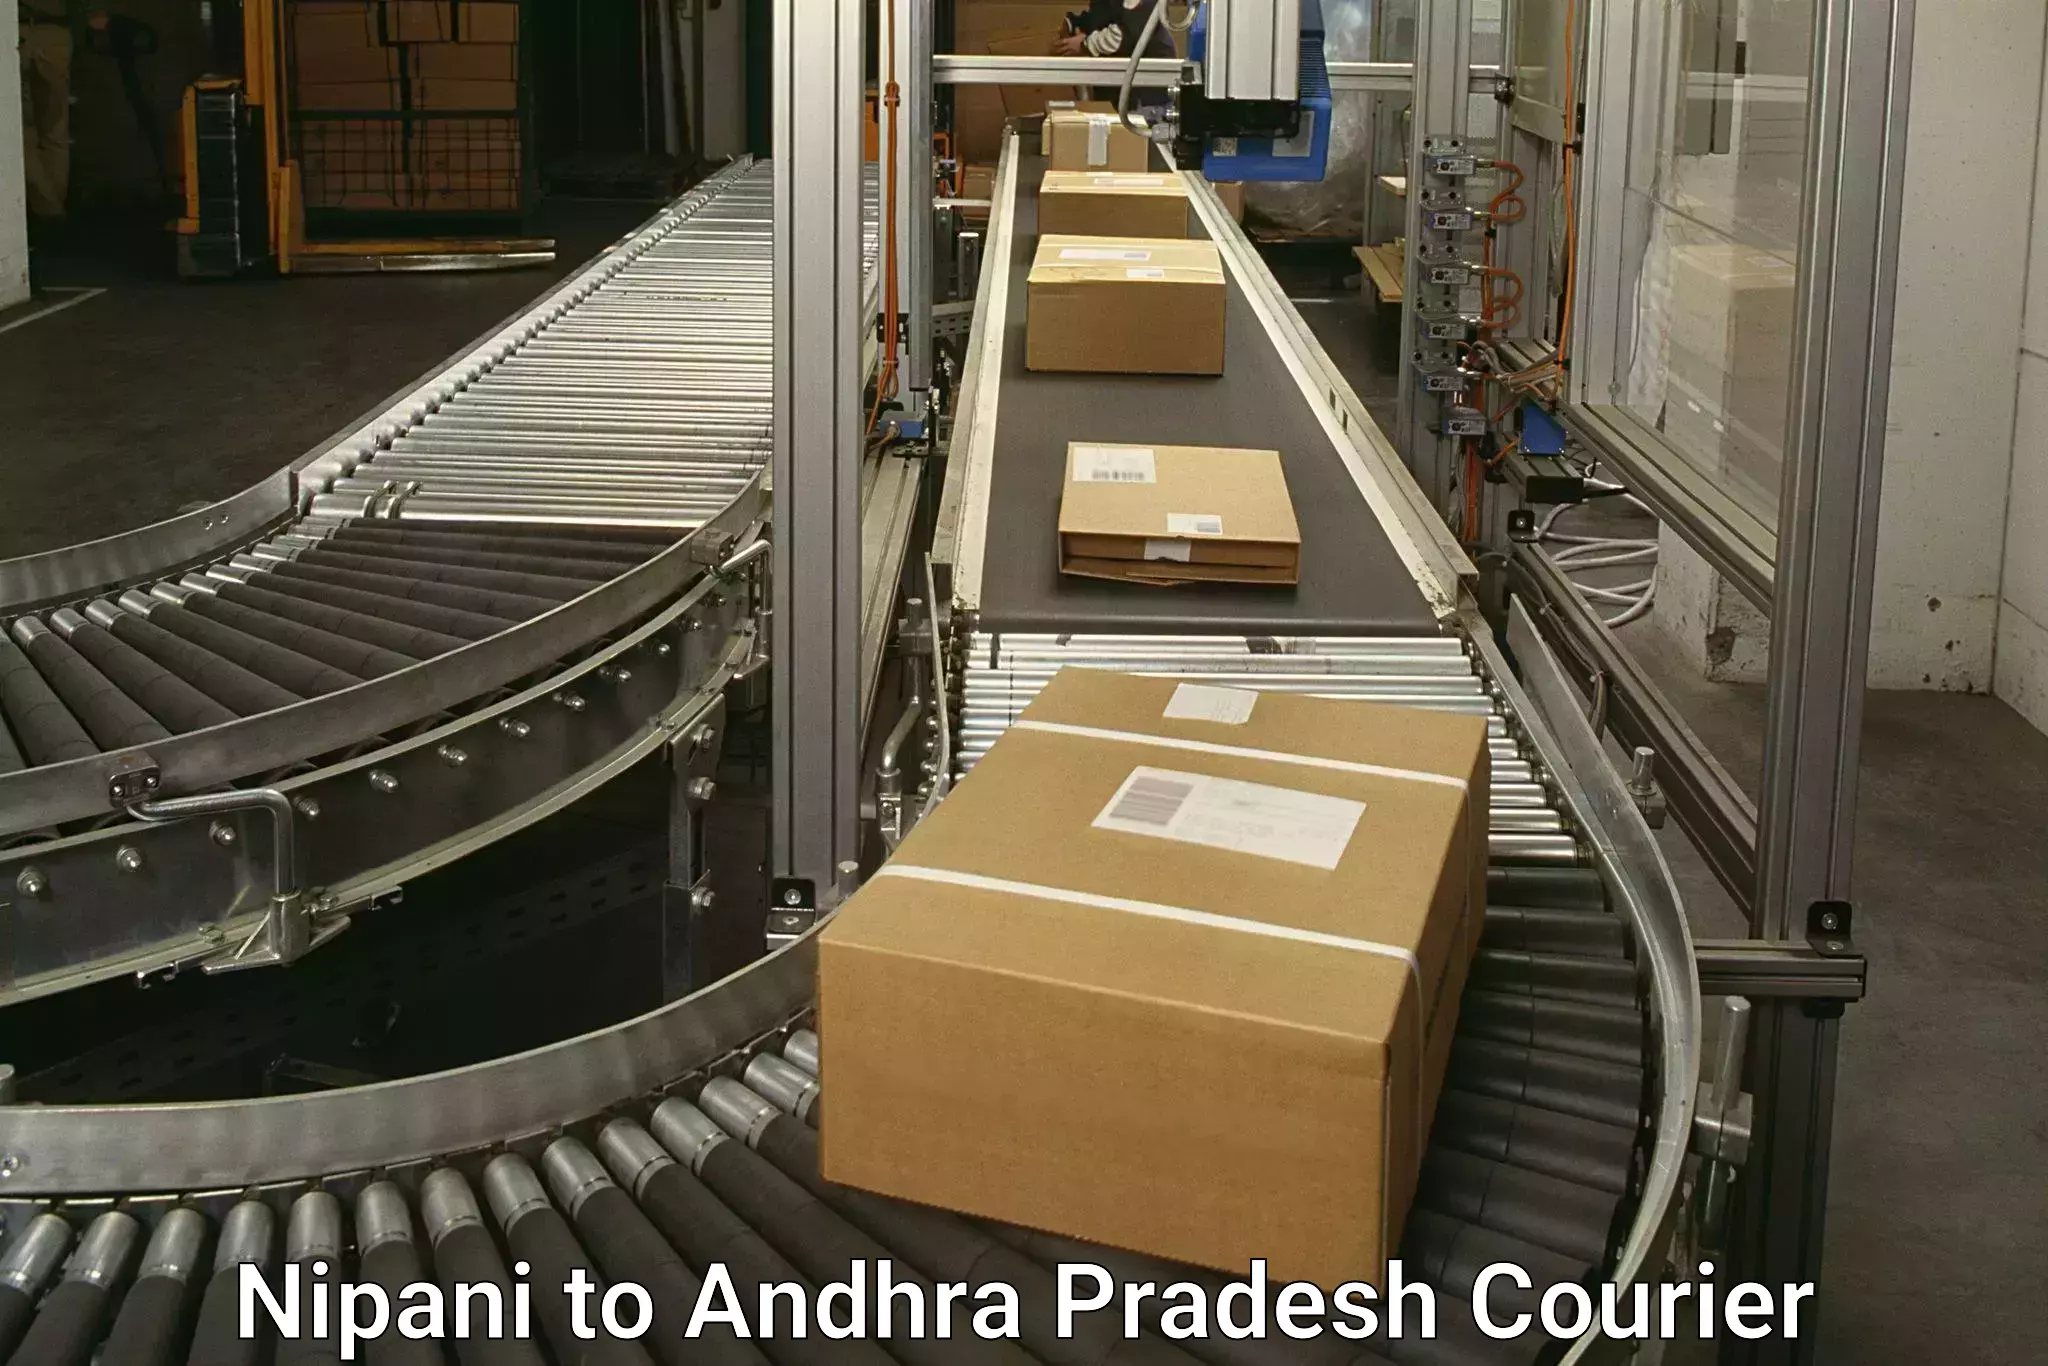 Global parcel delivery Nipani to Visakhapatnam Port